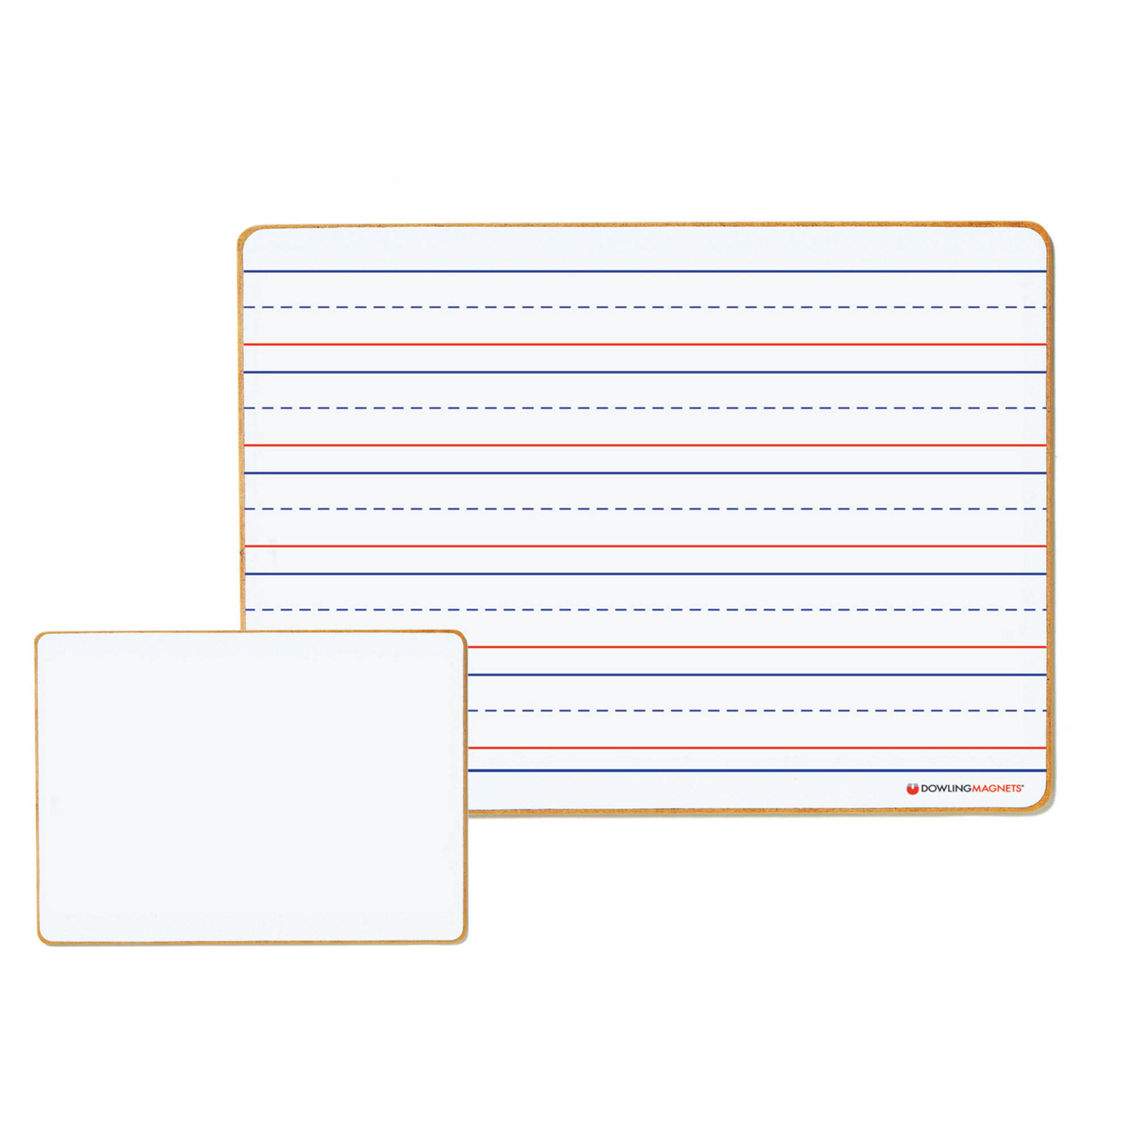 Dowling Magnets® Double-sided Magnetic Dry-Erase Board, Line-Ruled/Blank, Pack of 6 - Image 2 of 2